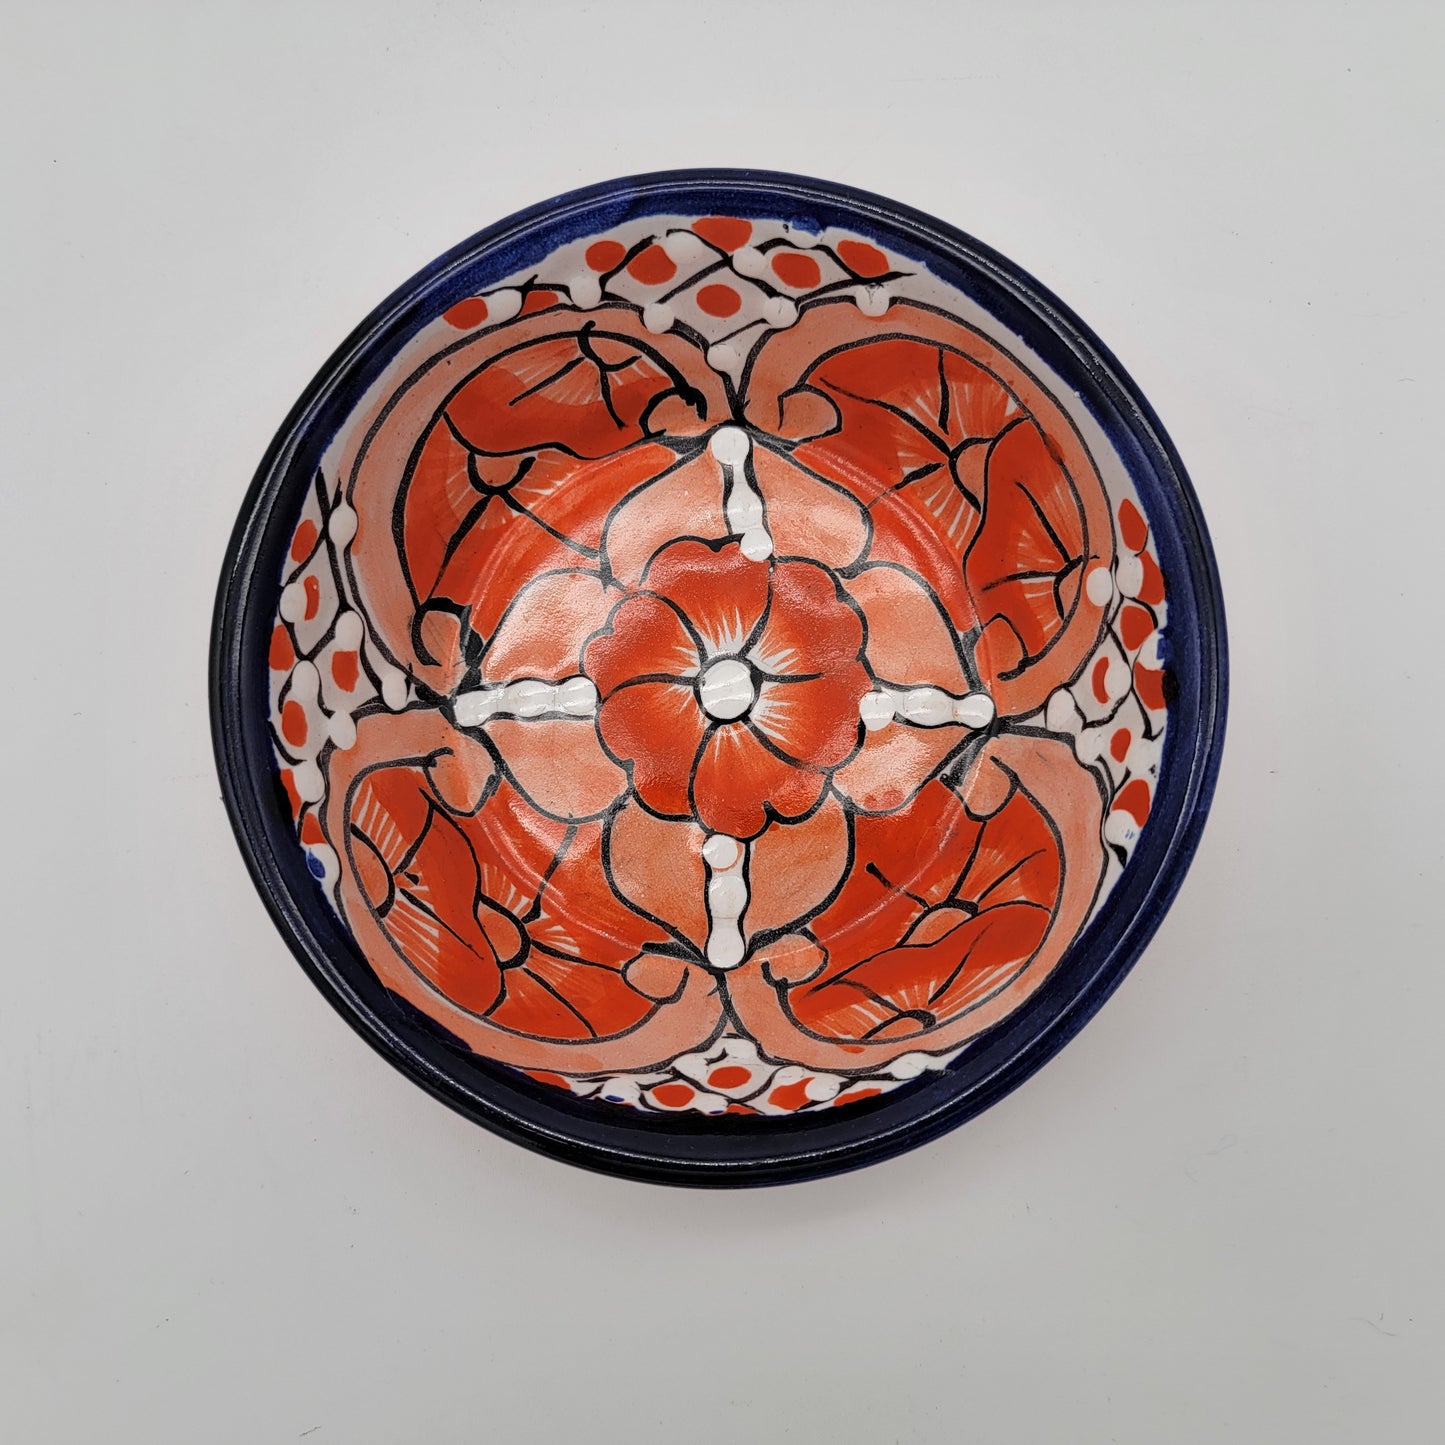 Mexican Pottery Bowl